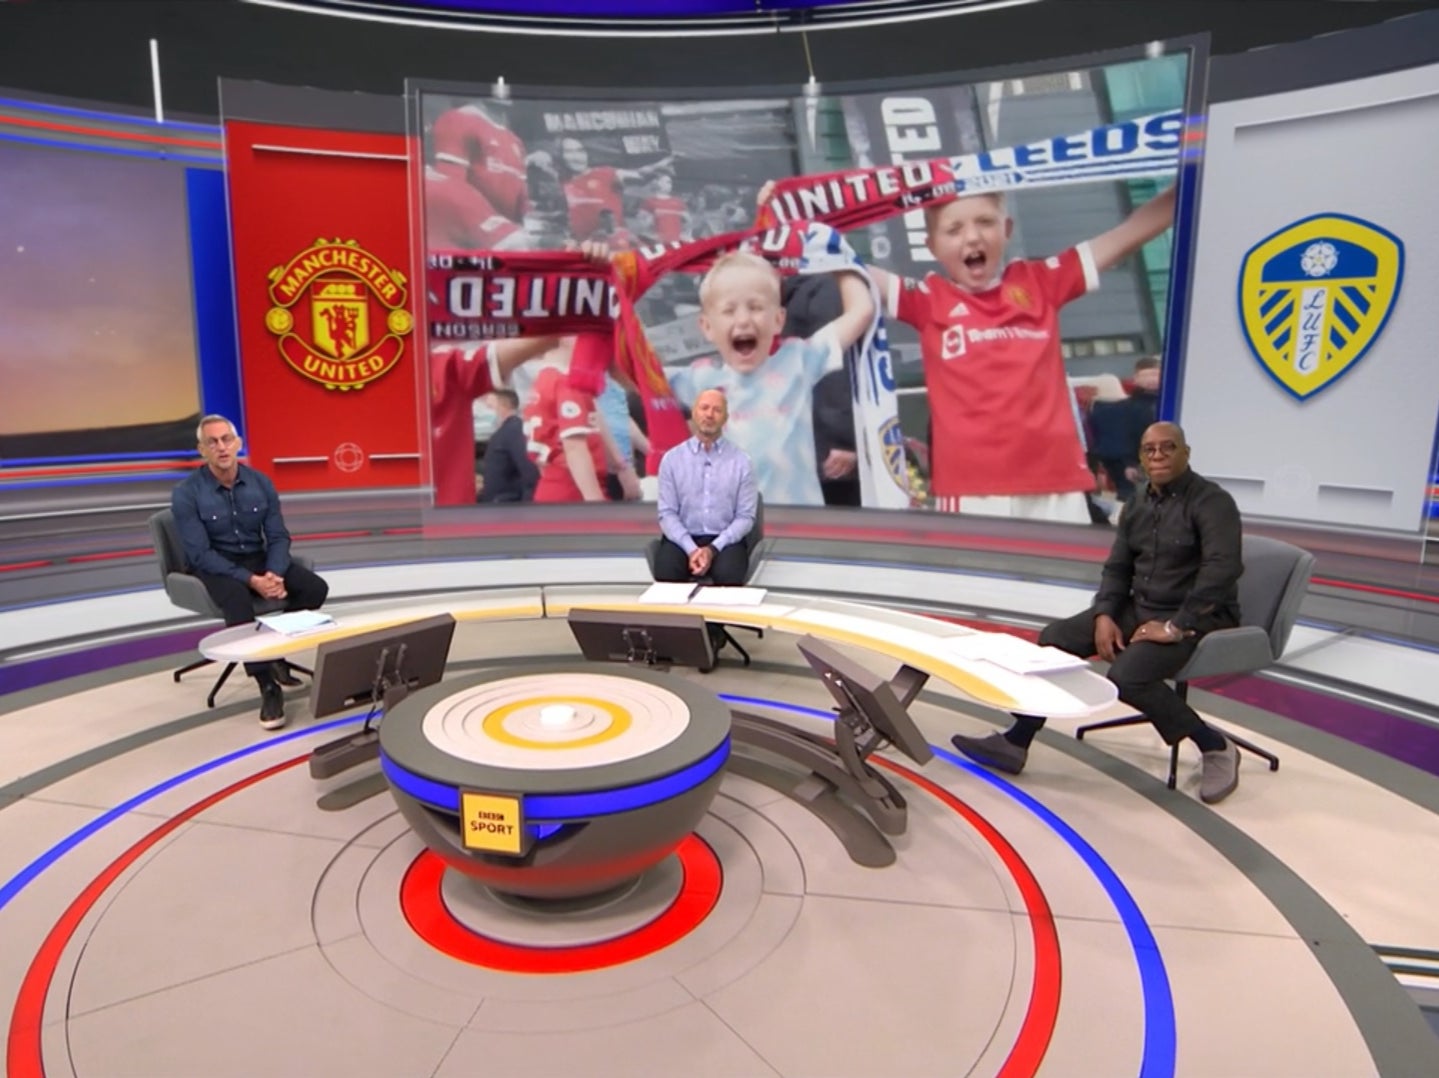 Gary Lineker, Alan Shearer and Ian Wright on last week’s ‘Match of the Day’